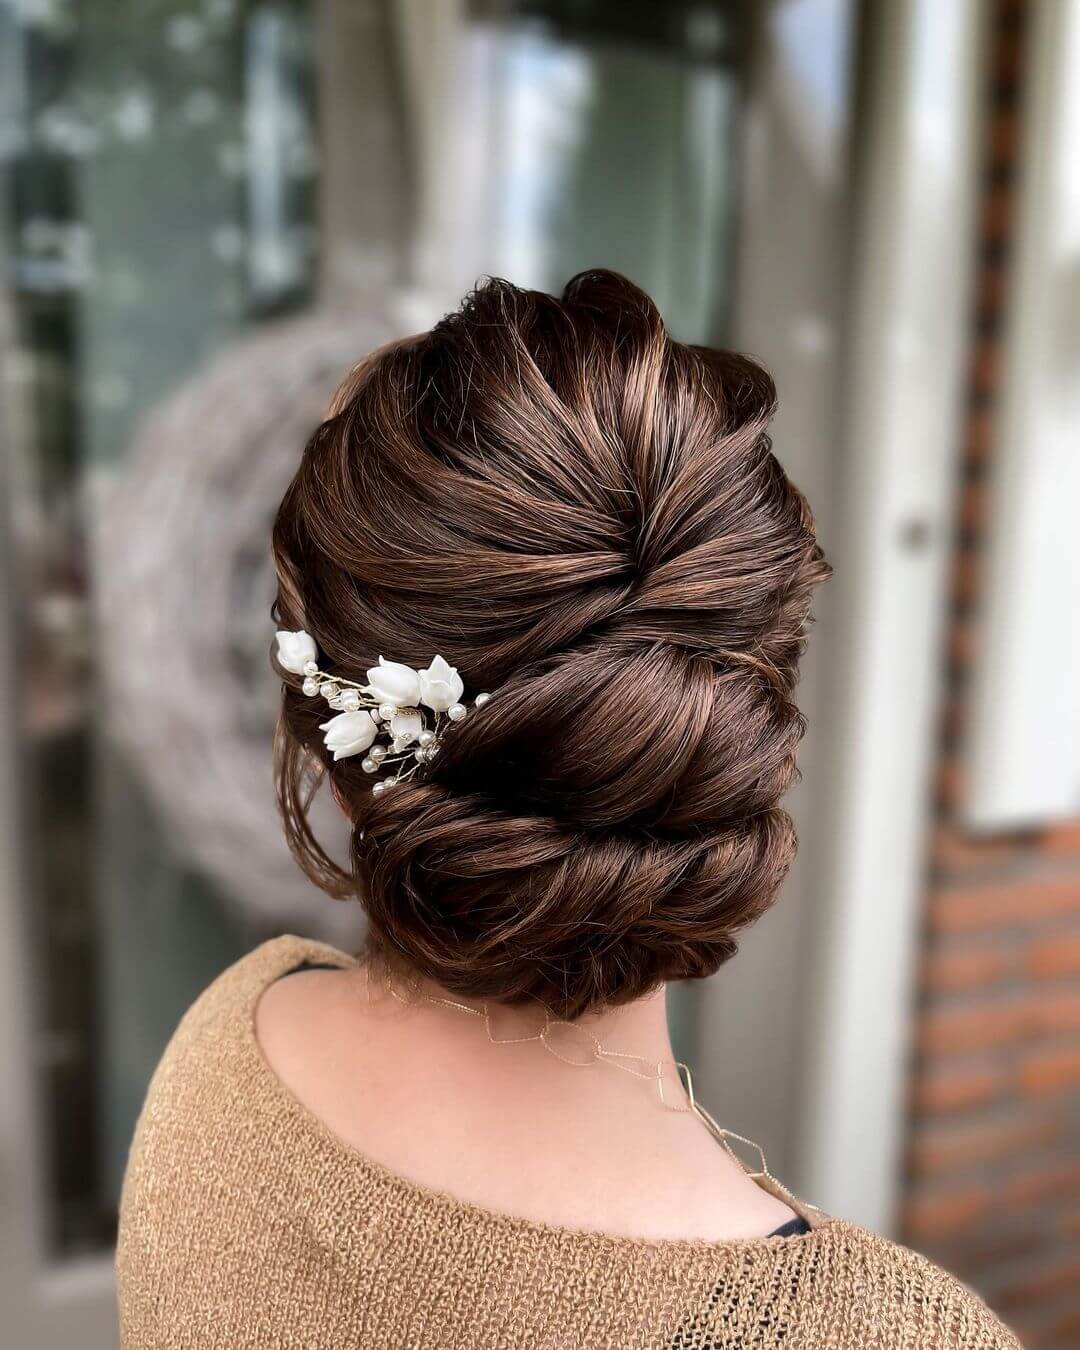 Wedding Guest Hairstyles Fishtail braid and rolled up bun!